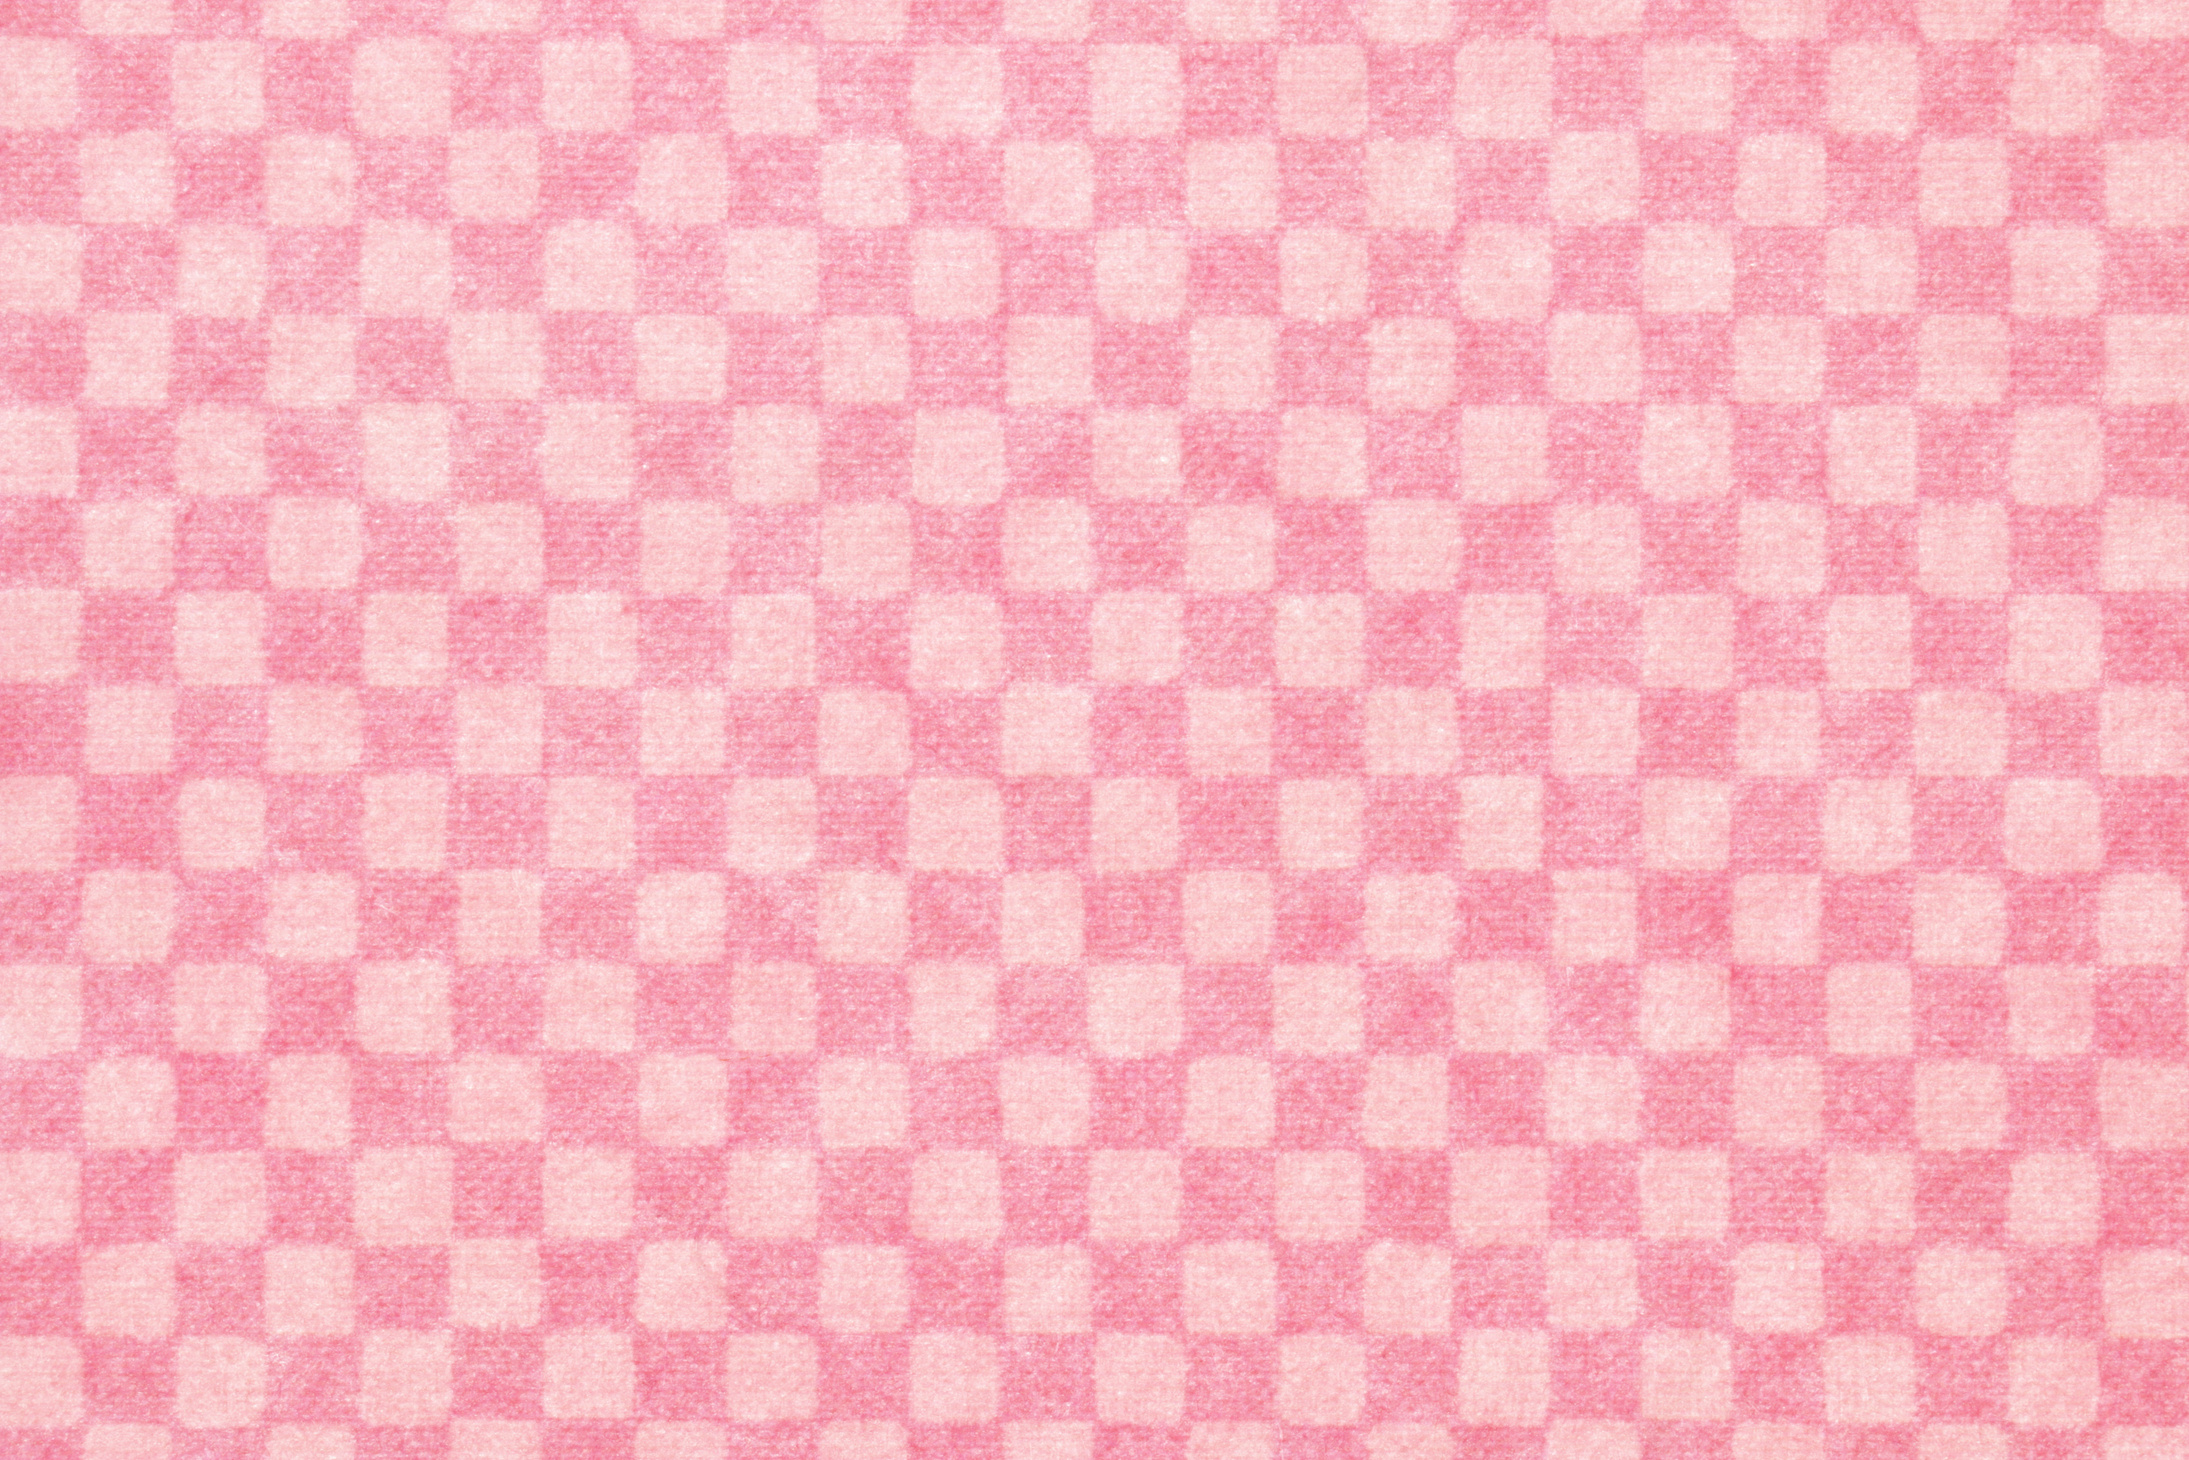 Japanese pink checkered pattern paper texture or vintage background